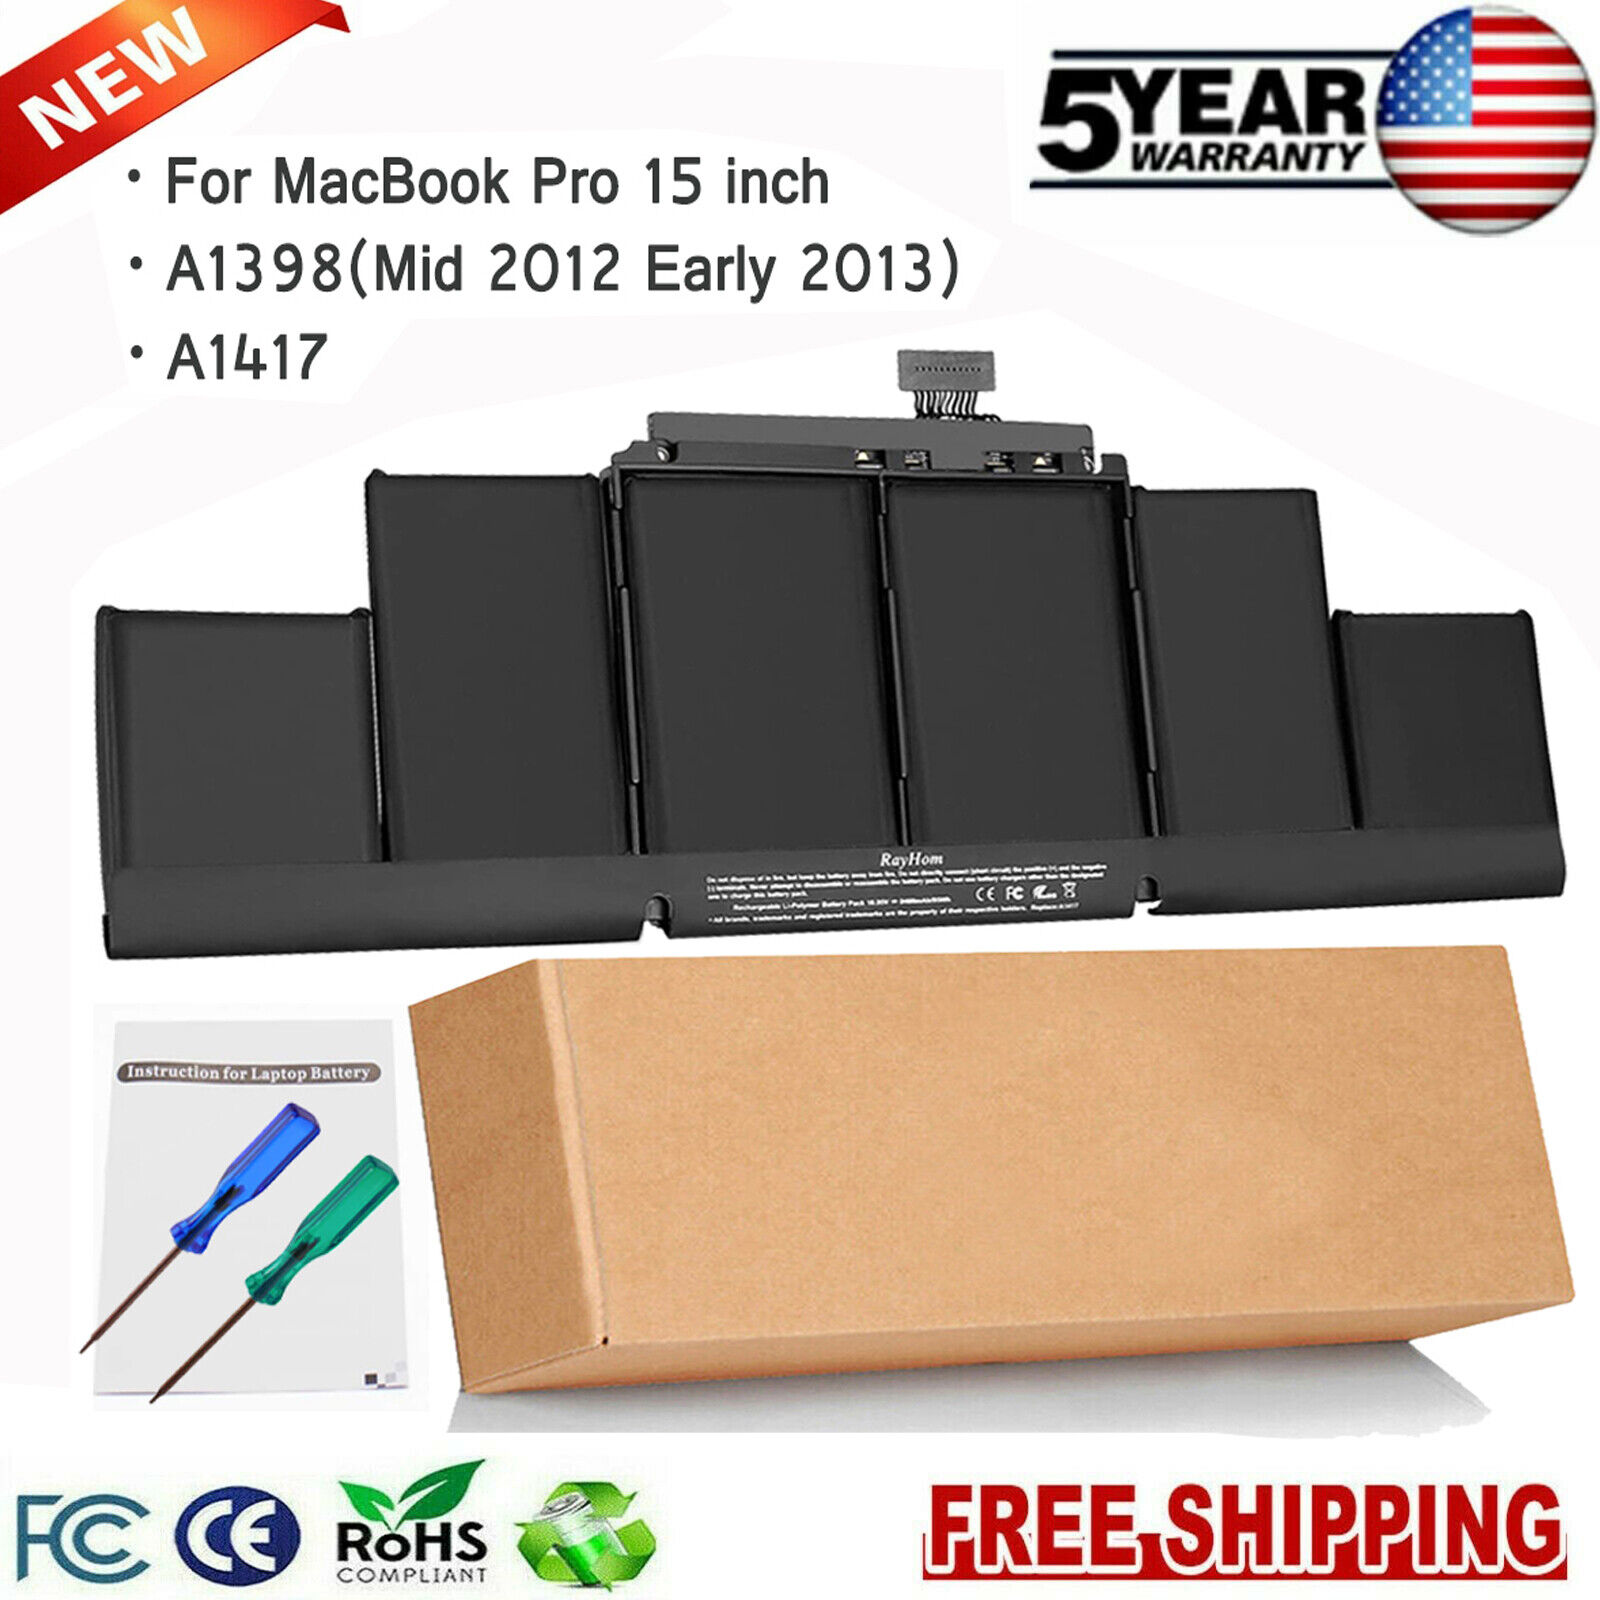 A1417 OEM Battery for Apple Macbook Pro 15 Retina A1398 Mid 2012 Early 2013 US